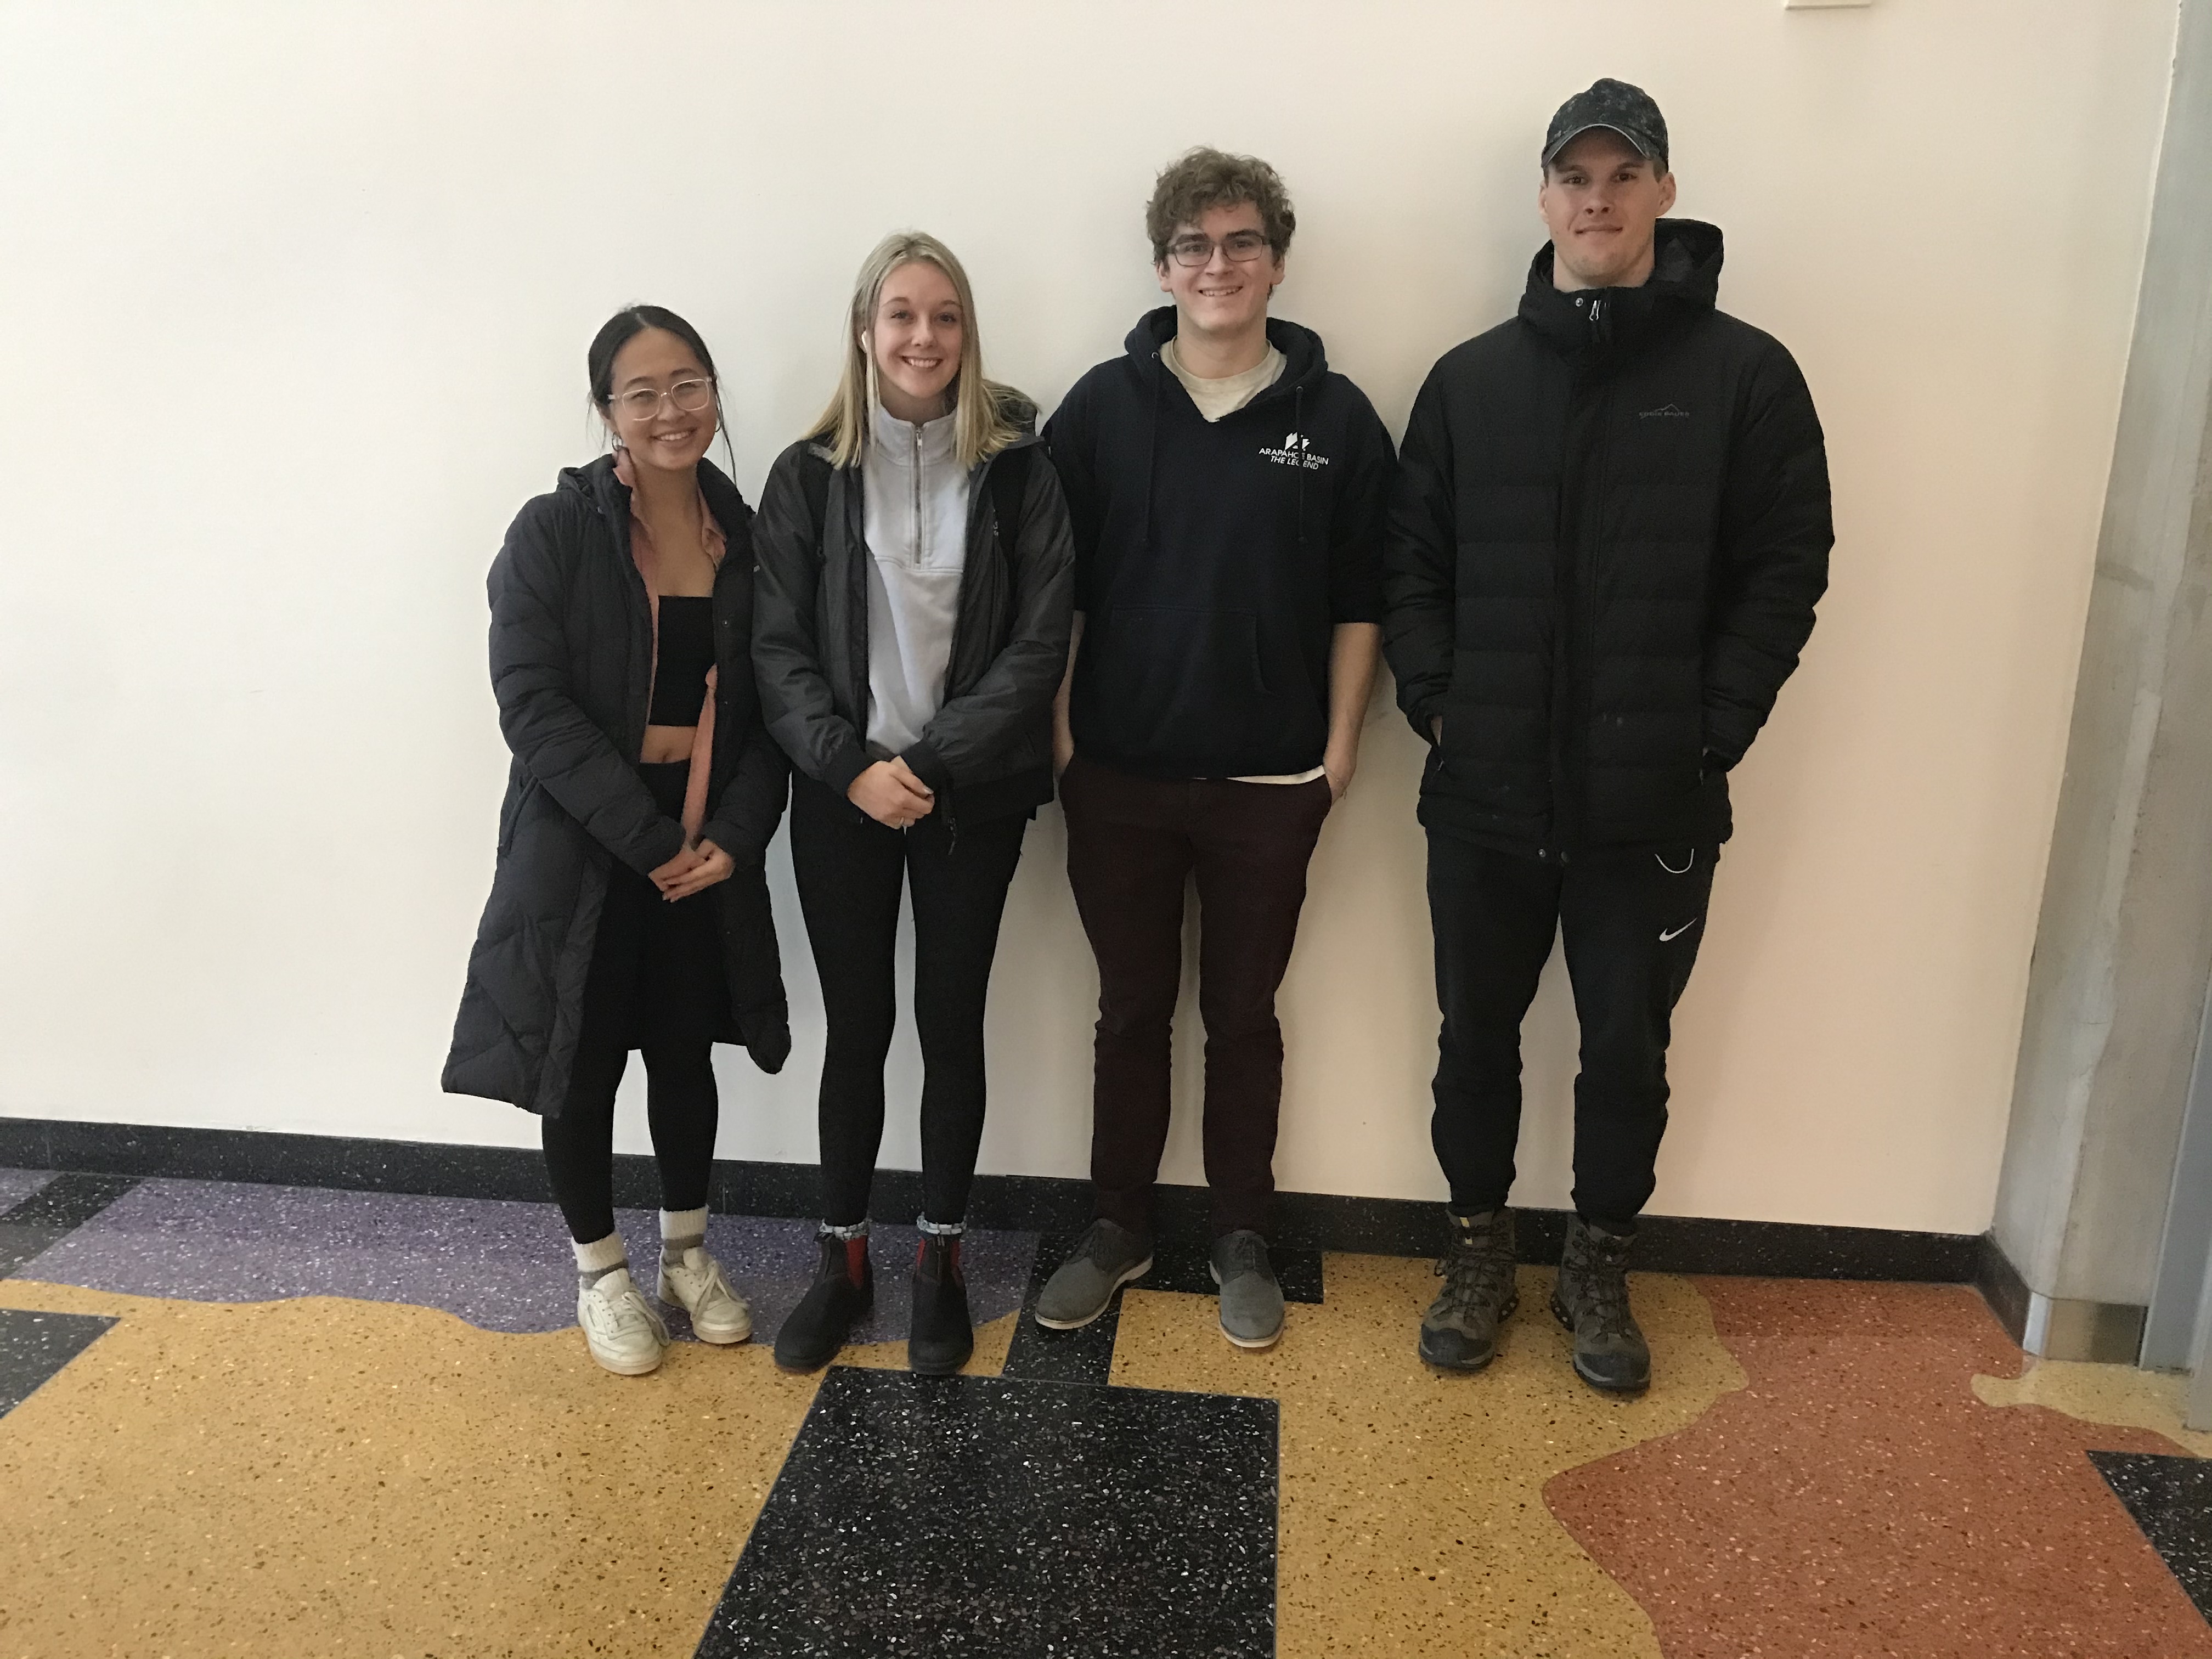 From Left to Right: Jessica Wang (Communicator), Abby Drake (BWIG), Mark Hutson (BSAC/BPAG), and Preston Lewis (Team Leader)